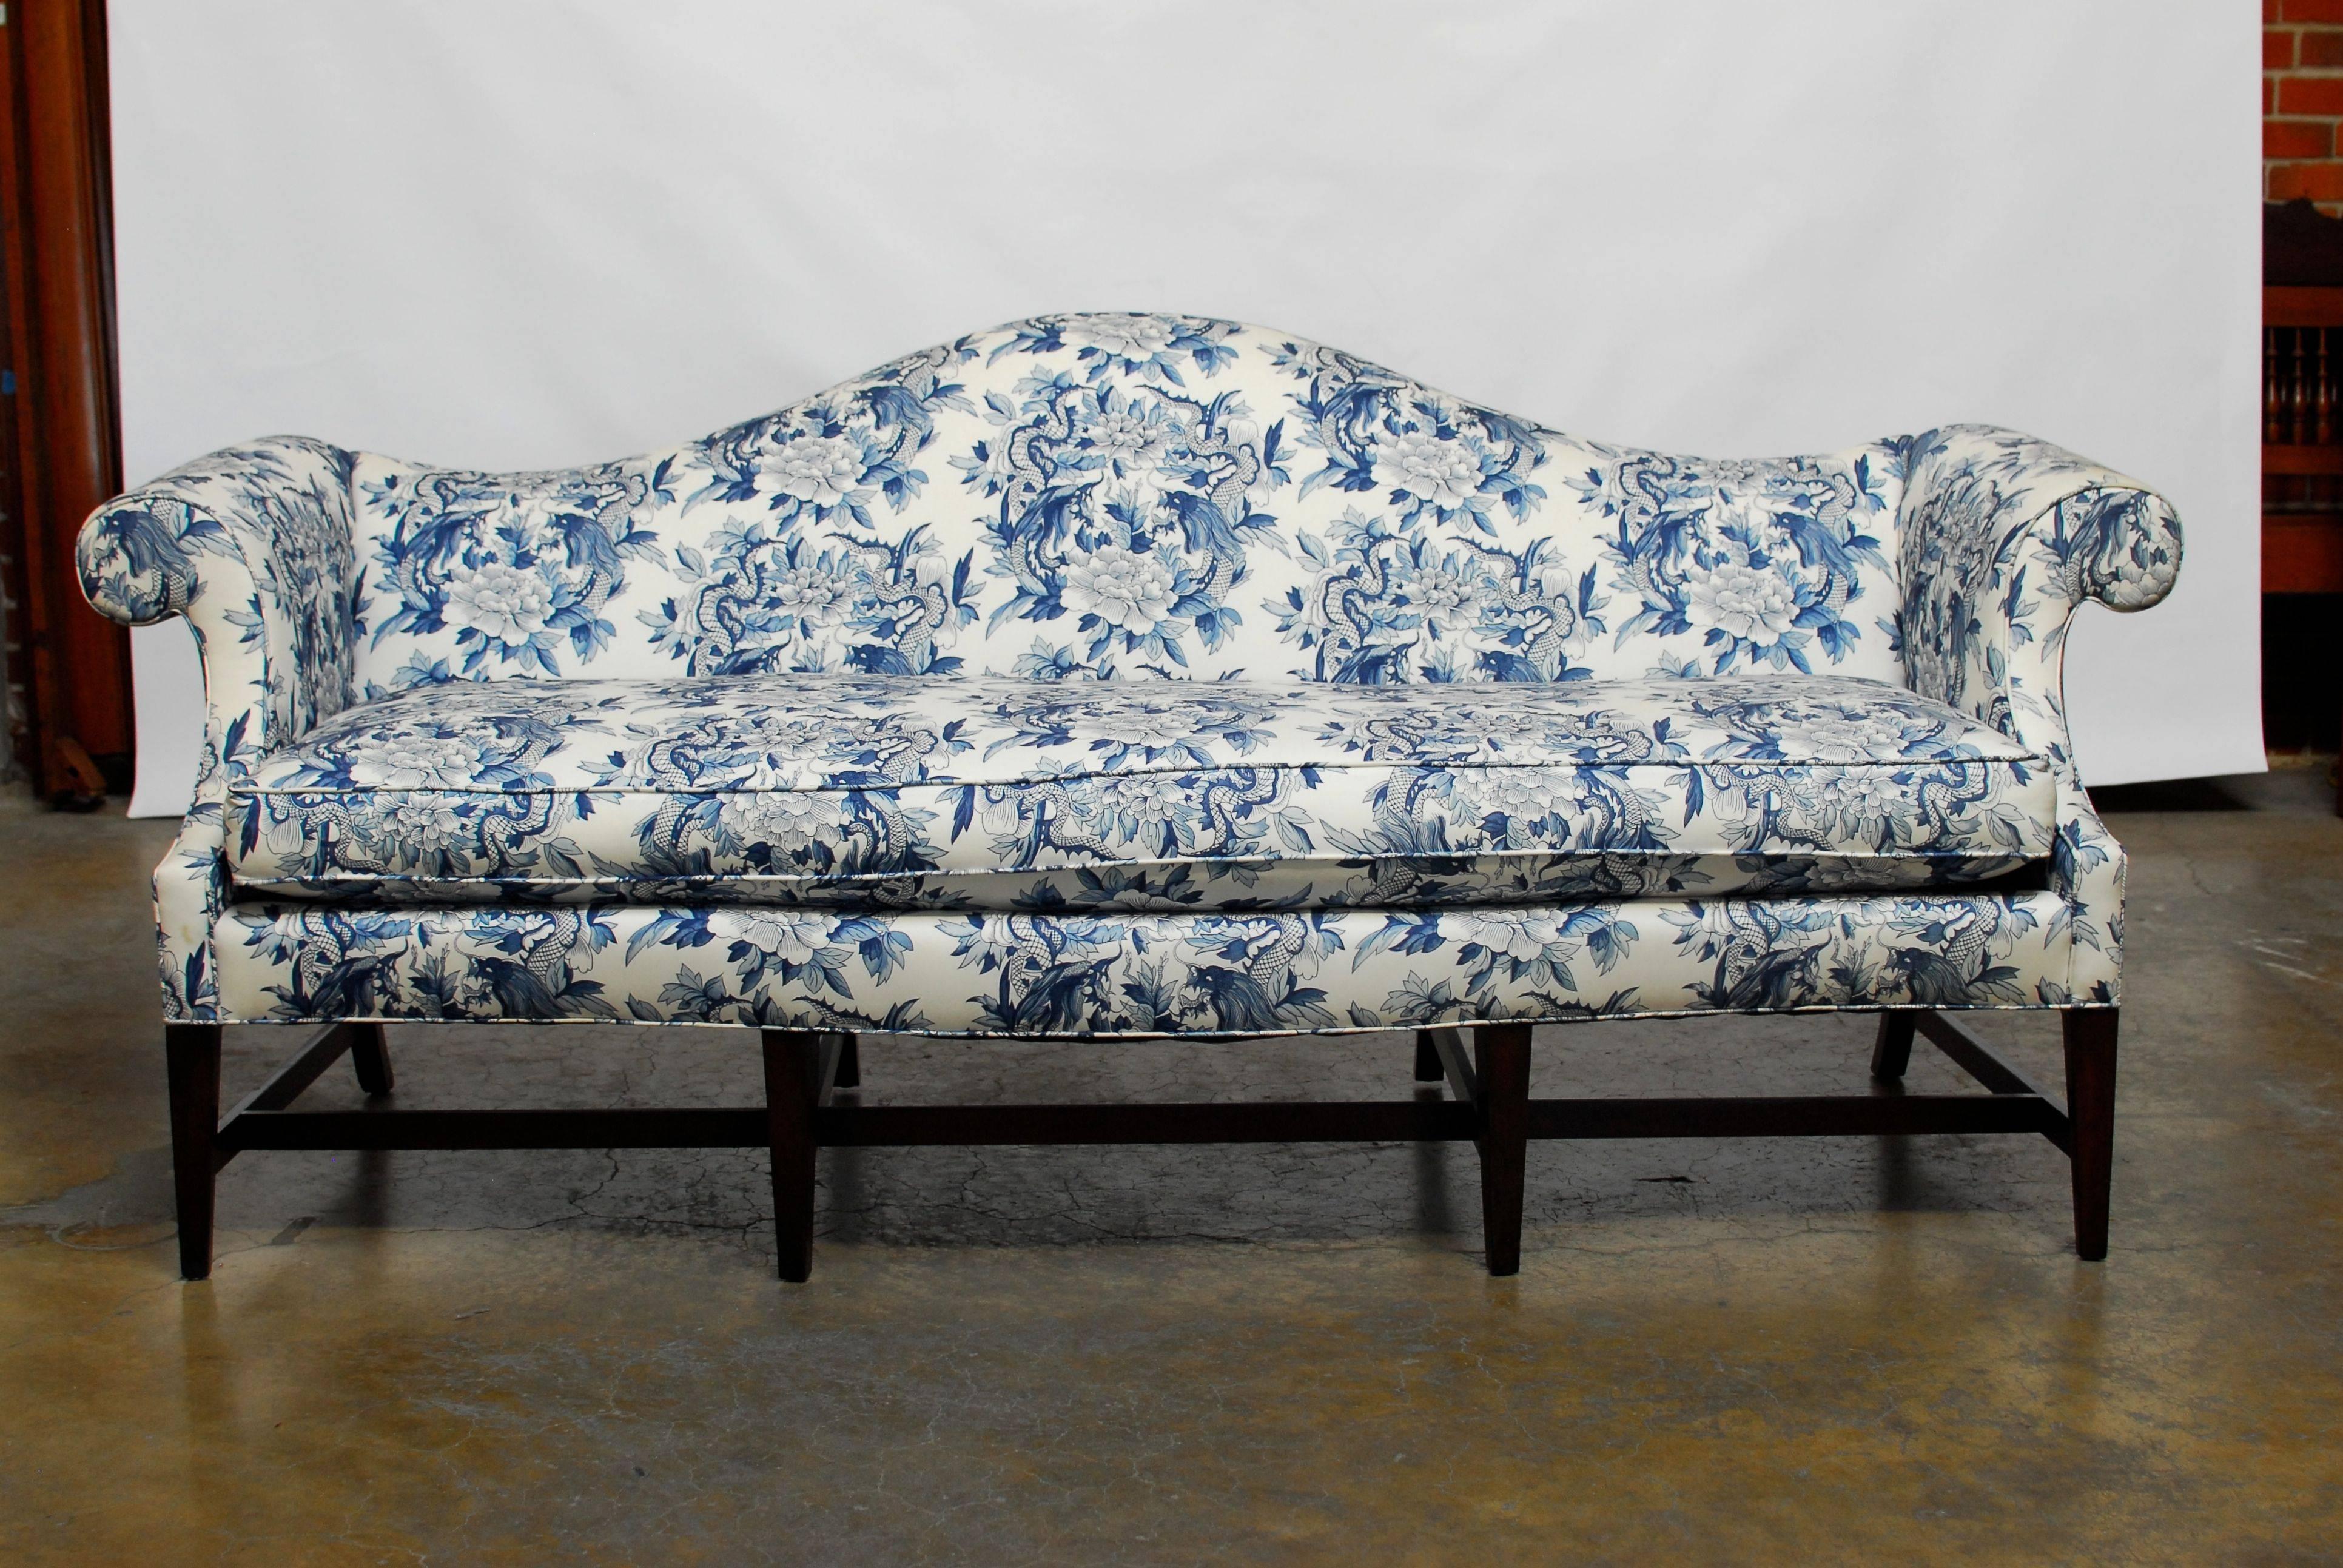 Dramatic Chippendale style sofa with a camelback form and a serpentine bow front edge. Features Ralph Lauren toile chinoiserie style blue and white upholstery with dragon and foliate detail. Sits on four tapered front legs with cross stretchers and